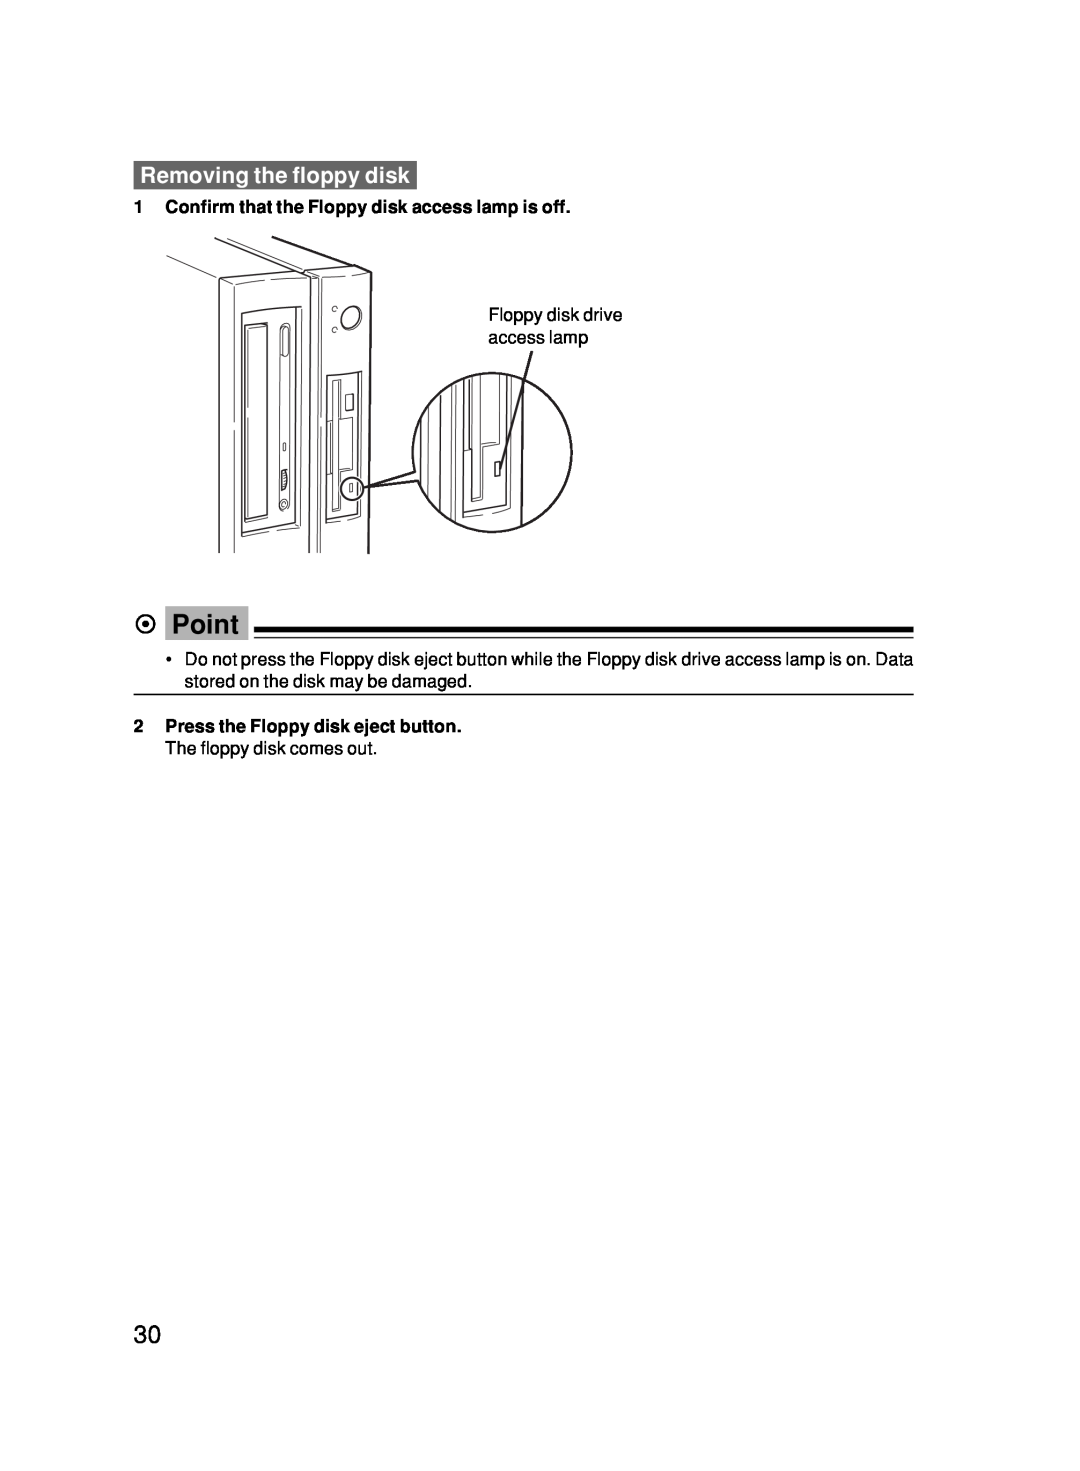 Fujitsu 500 user manual Removing the floppy disk, Confirm that the Floppy disk access lamp is off, Point 